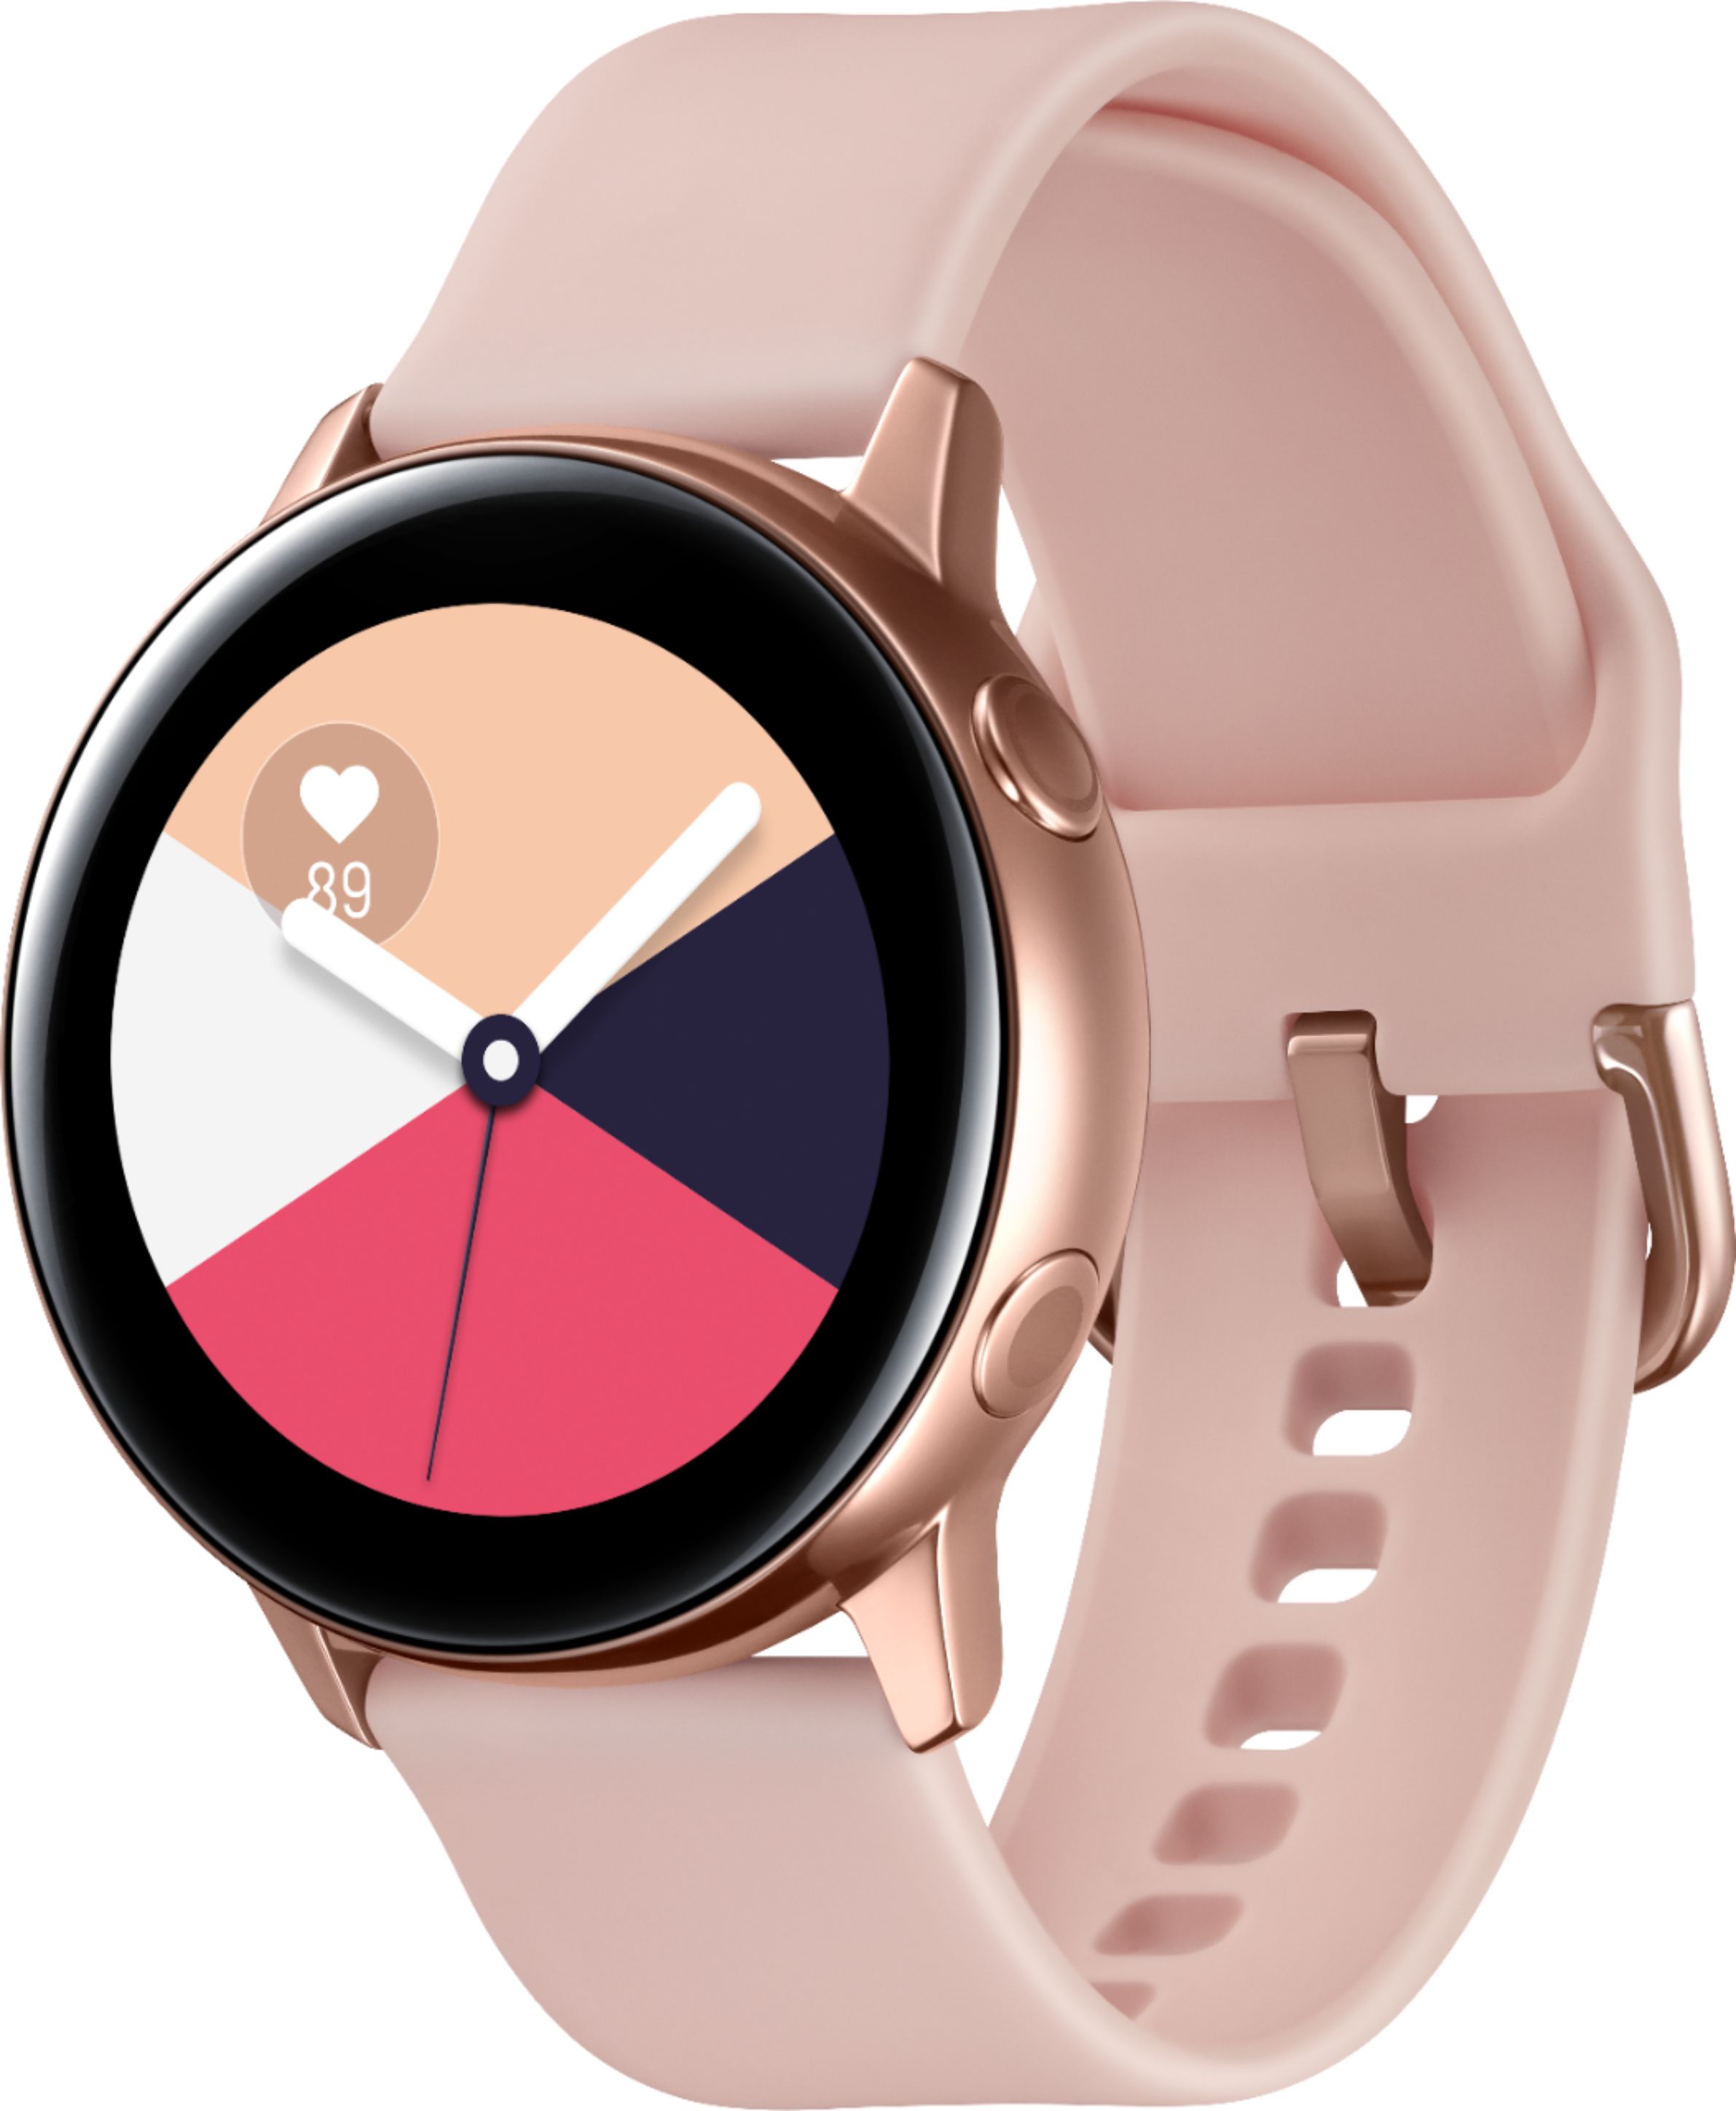 Left View: Samsung - Geek Squad Certified Refurbished Galaxy Watch Active Smartwatch 40mm Aluminium - Rose Gold